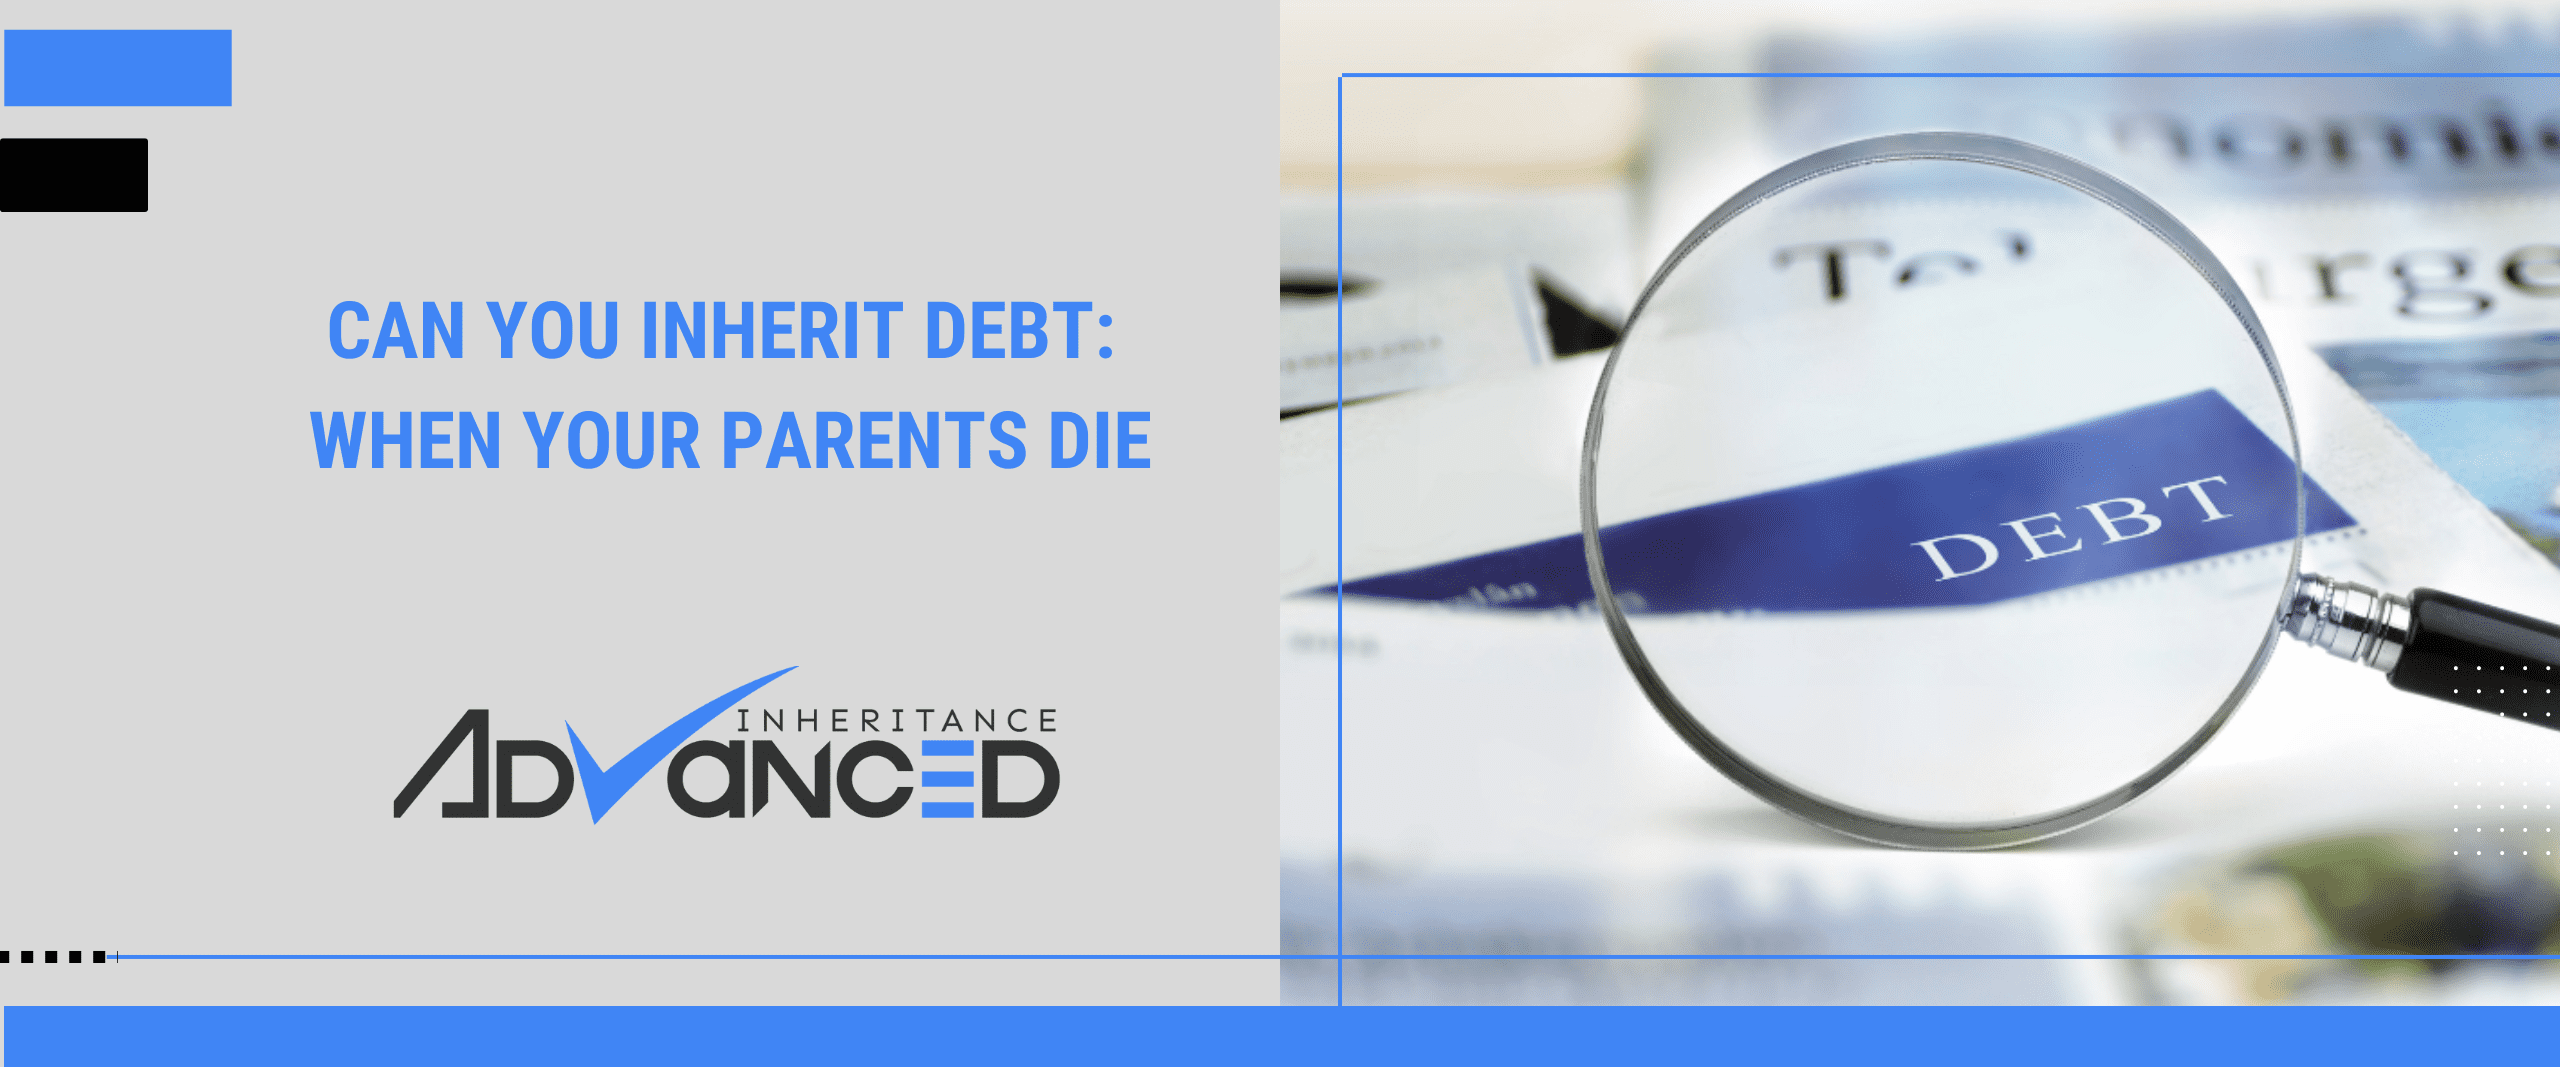 Can You Inherit Debt When Your Parents Die?